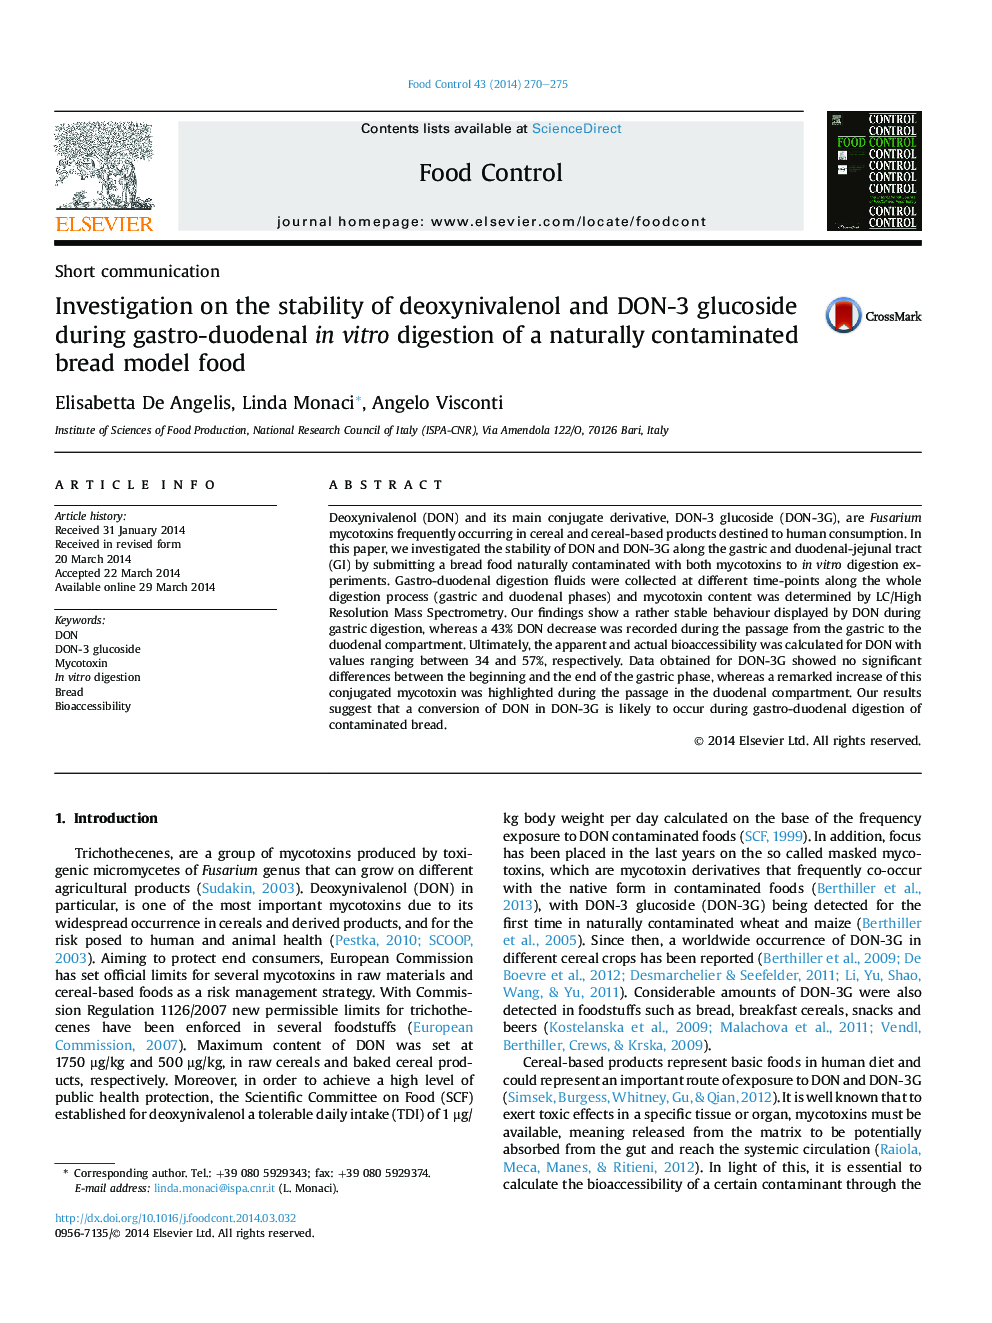 Short communicationInvestigation on the stability of deoxynivalenol and DON-3 glucoside during gastro-duodenal inÂ vitro digestion of a naturally contaminated bread model food